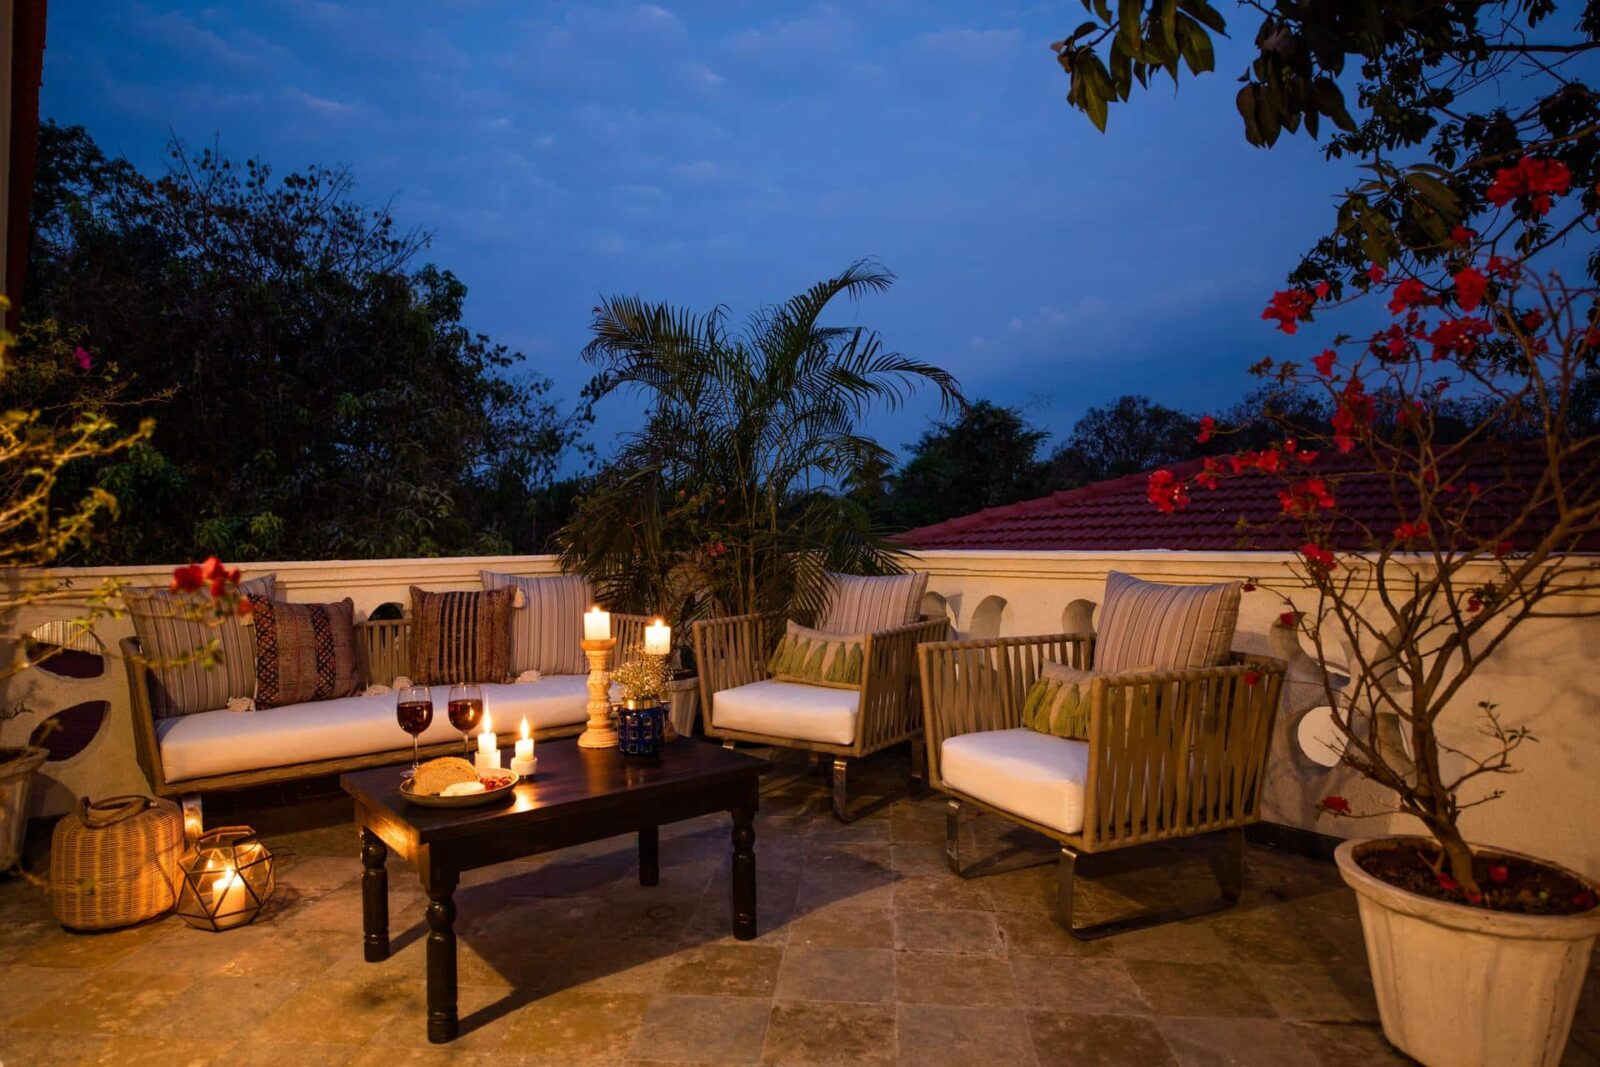 Monforte A - Luxury Bungalows in Goa for Sale - Stunning Terrace View